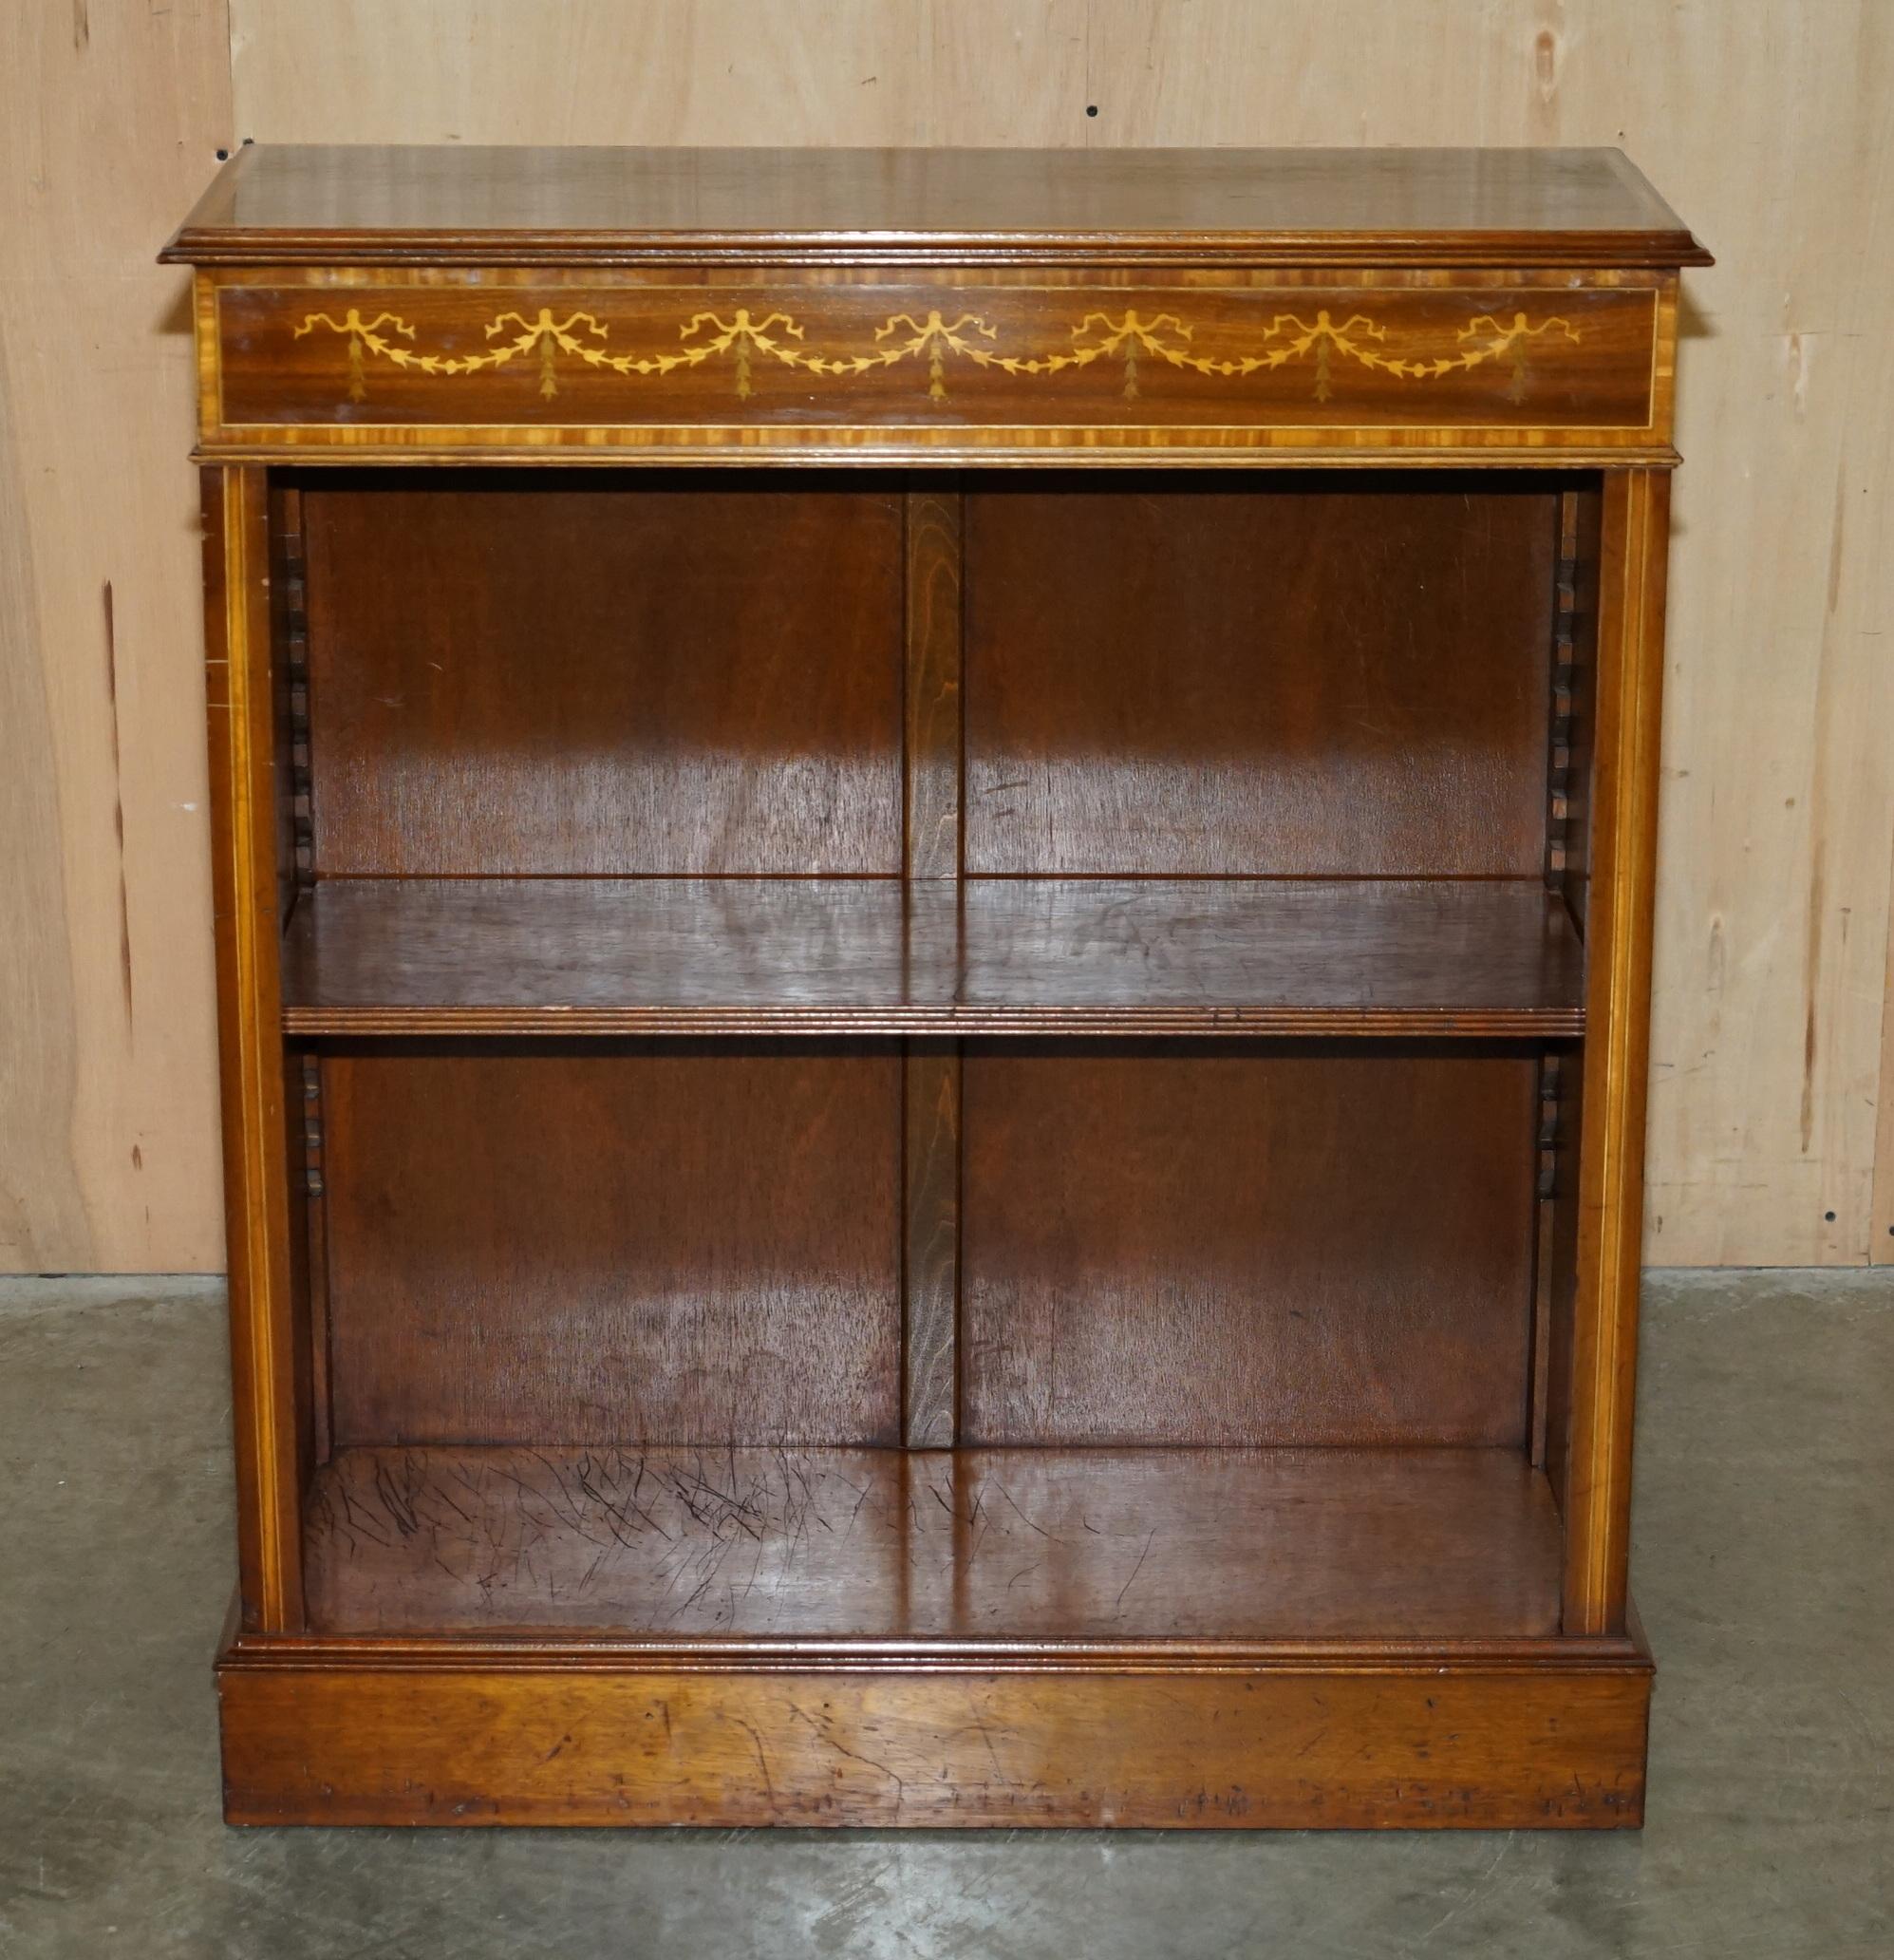 English EXQUISITELY INLAID BRiGHTS OF NETTLEBED SHERATON REVIVAL DWARF OPEN BOOKCASE For Sale